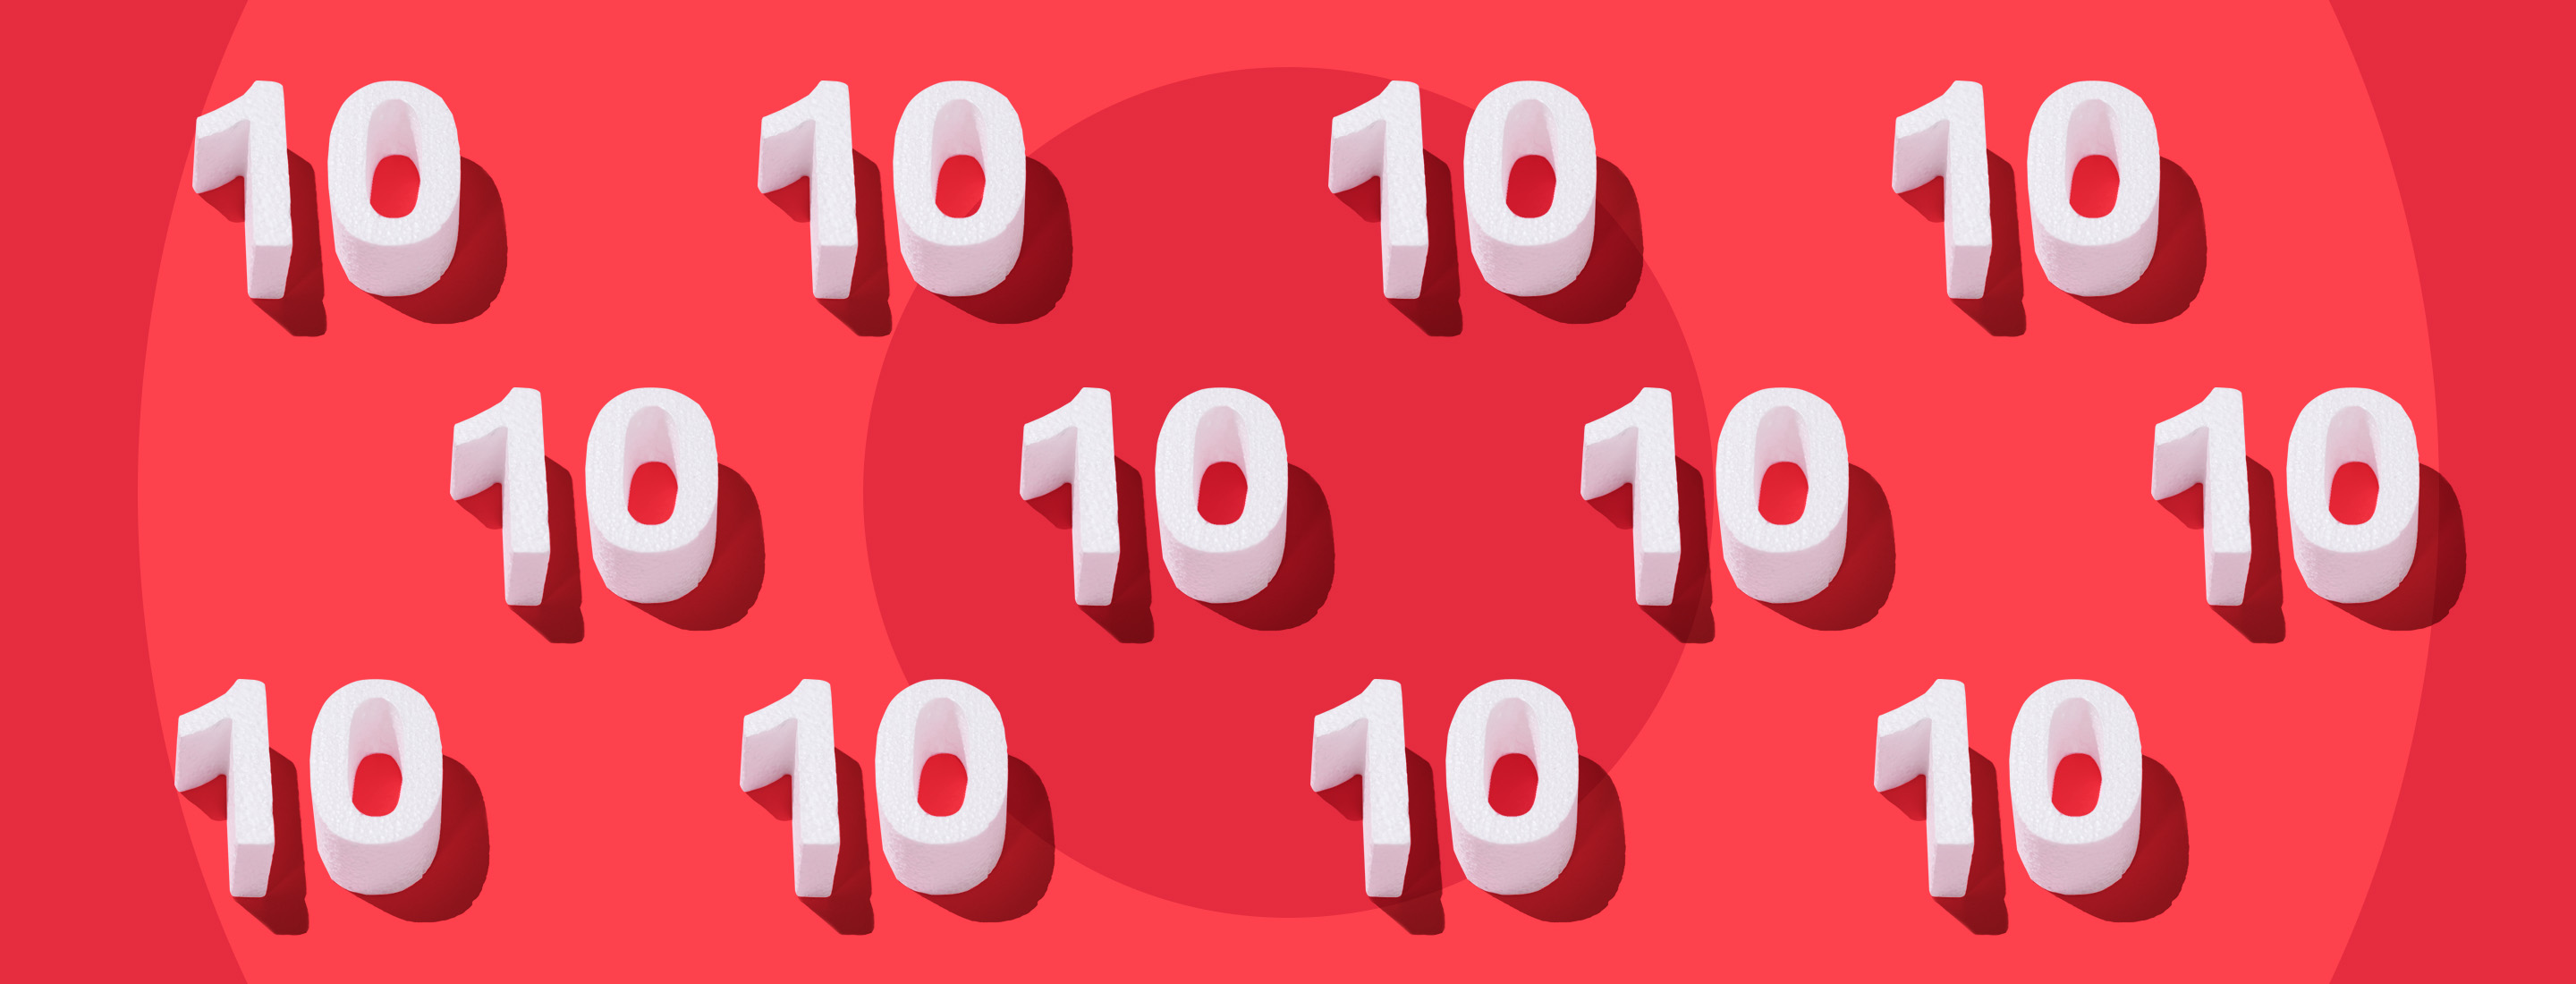 The number 10 repeated on a red background